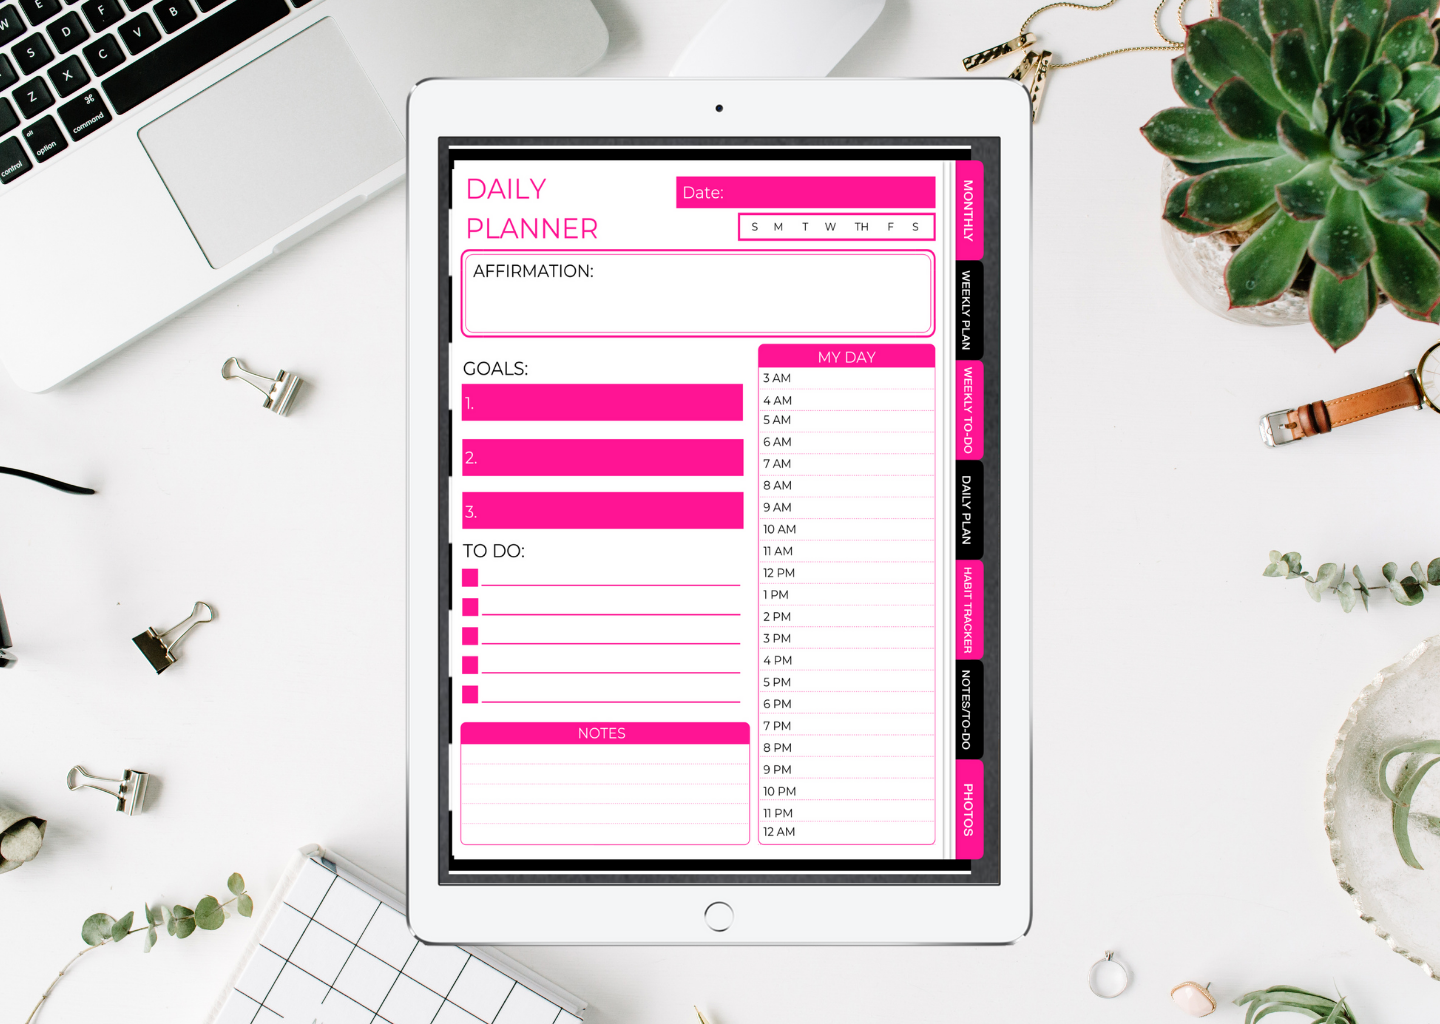 Everything PINK Planner